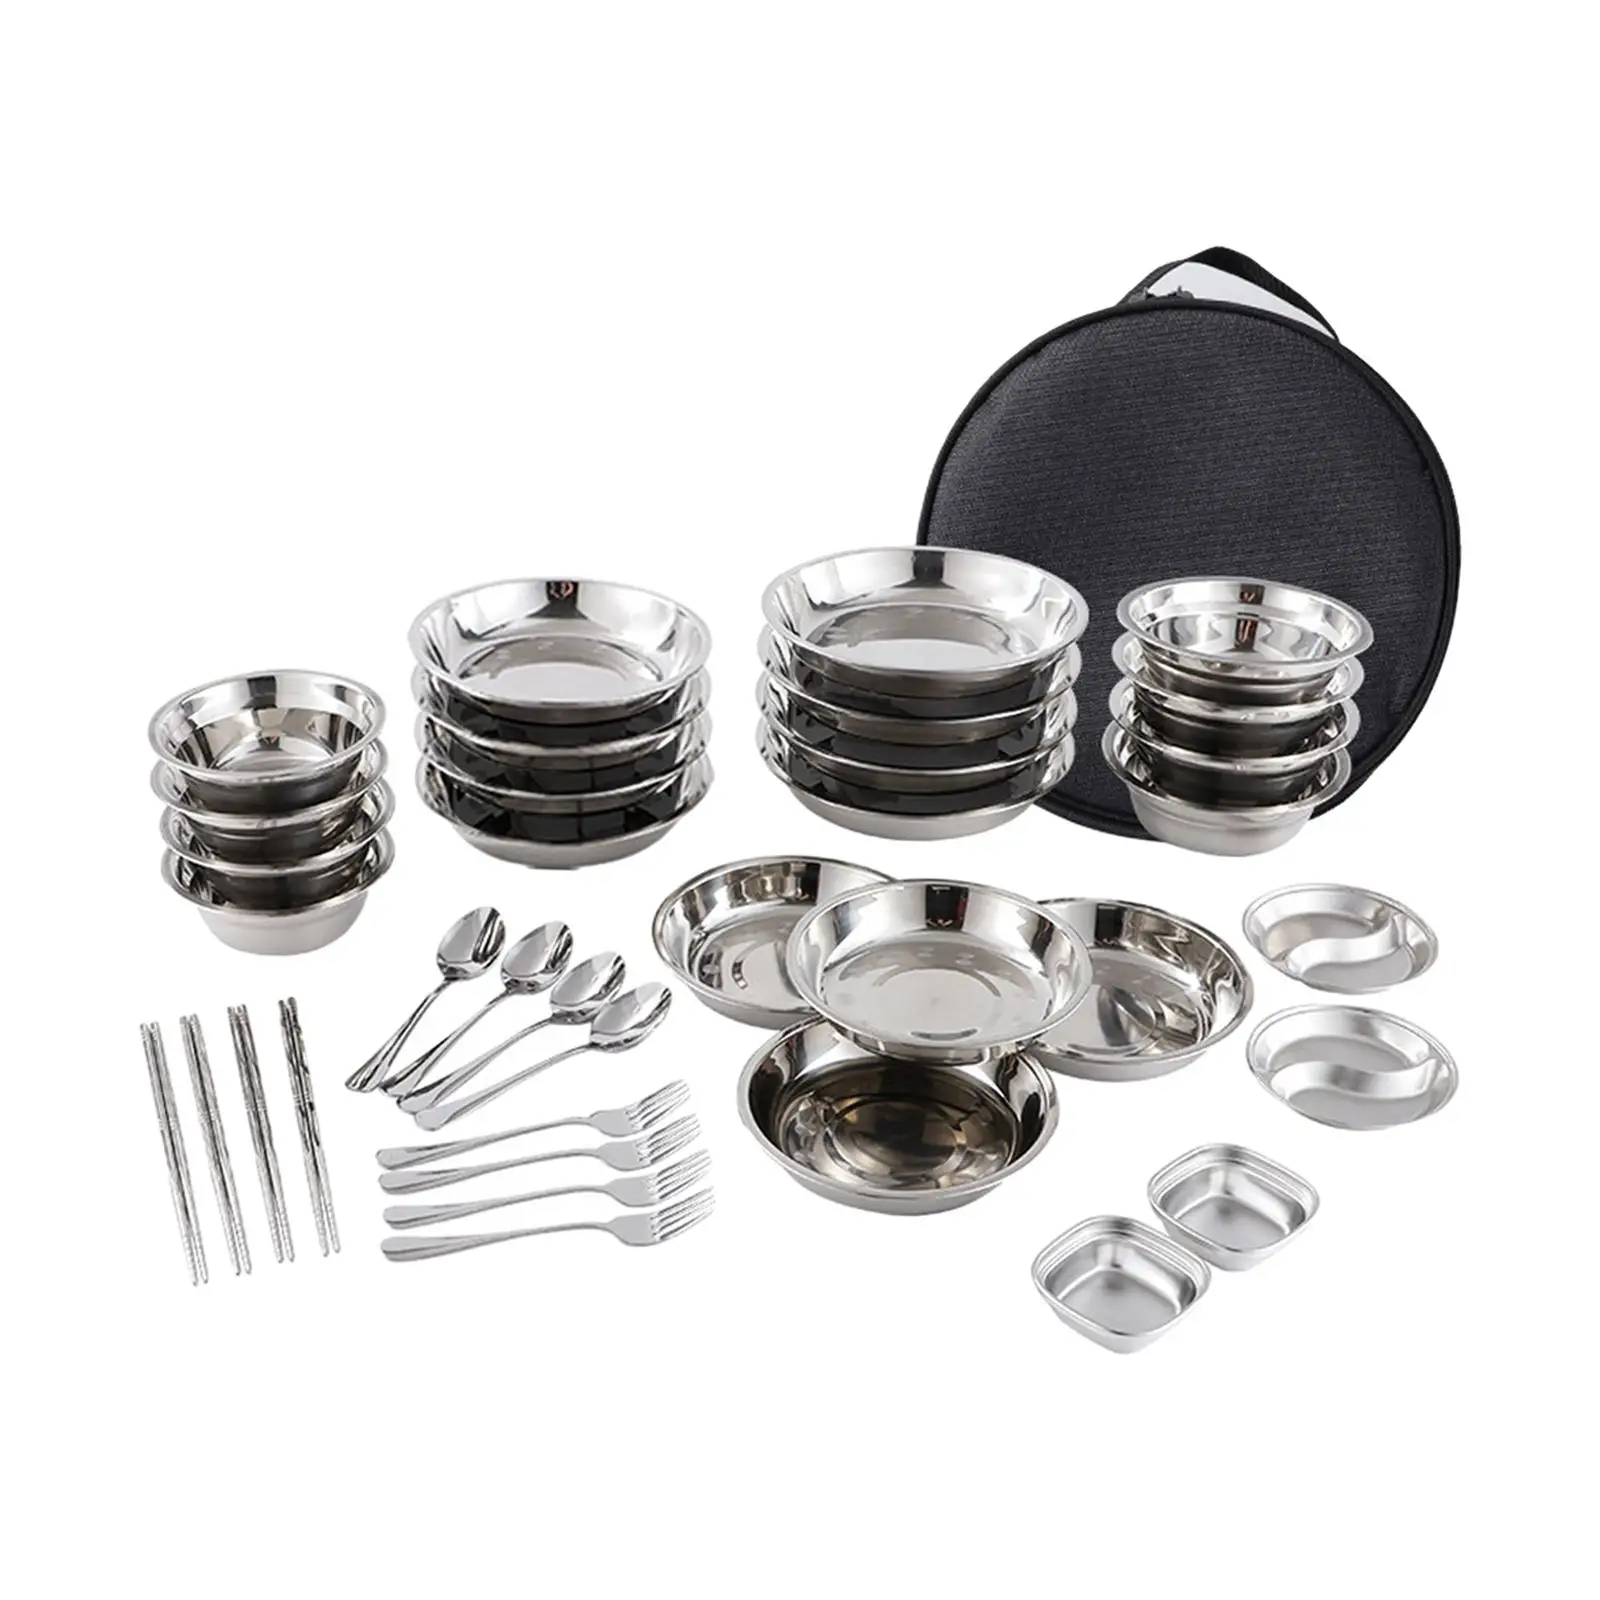 Stainless Steel Plates and Bowls Reusable for Backpacking Beach Picnic